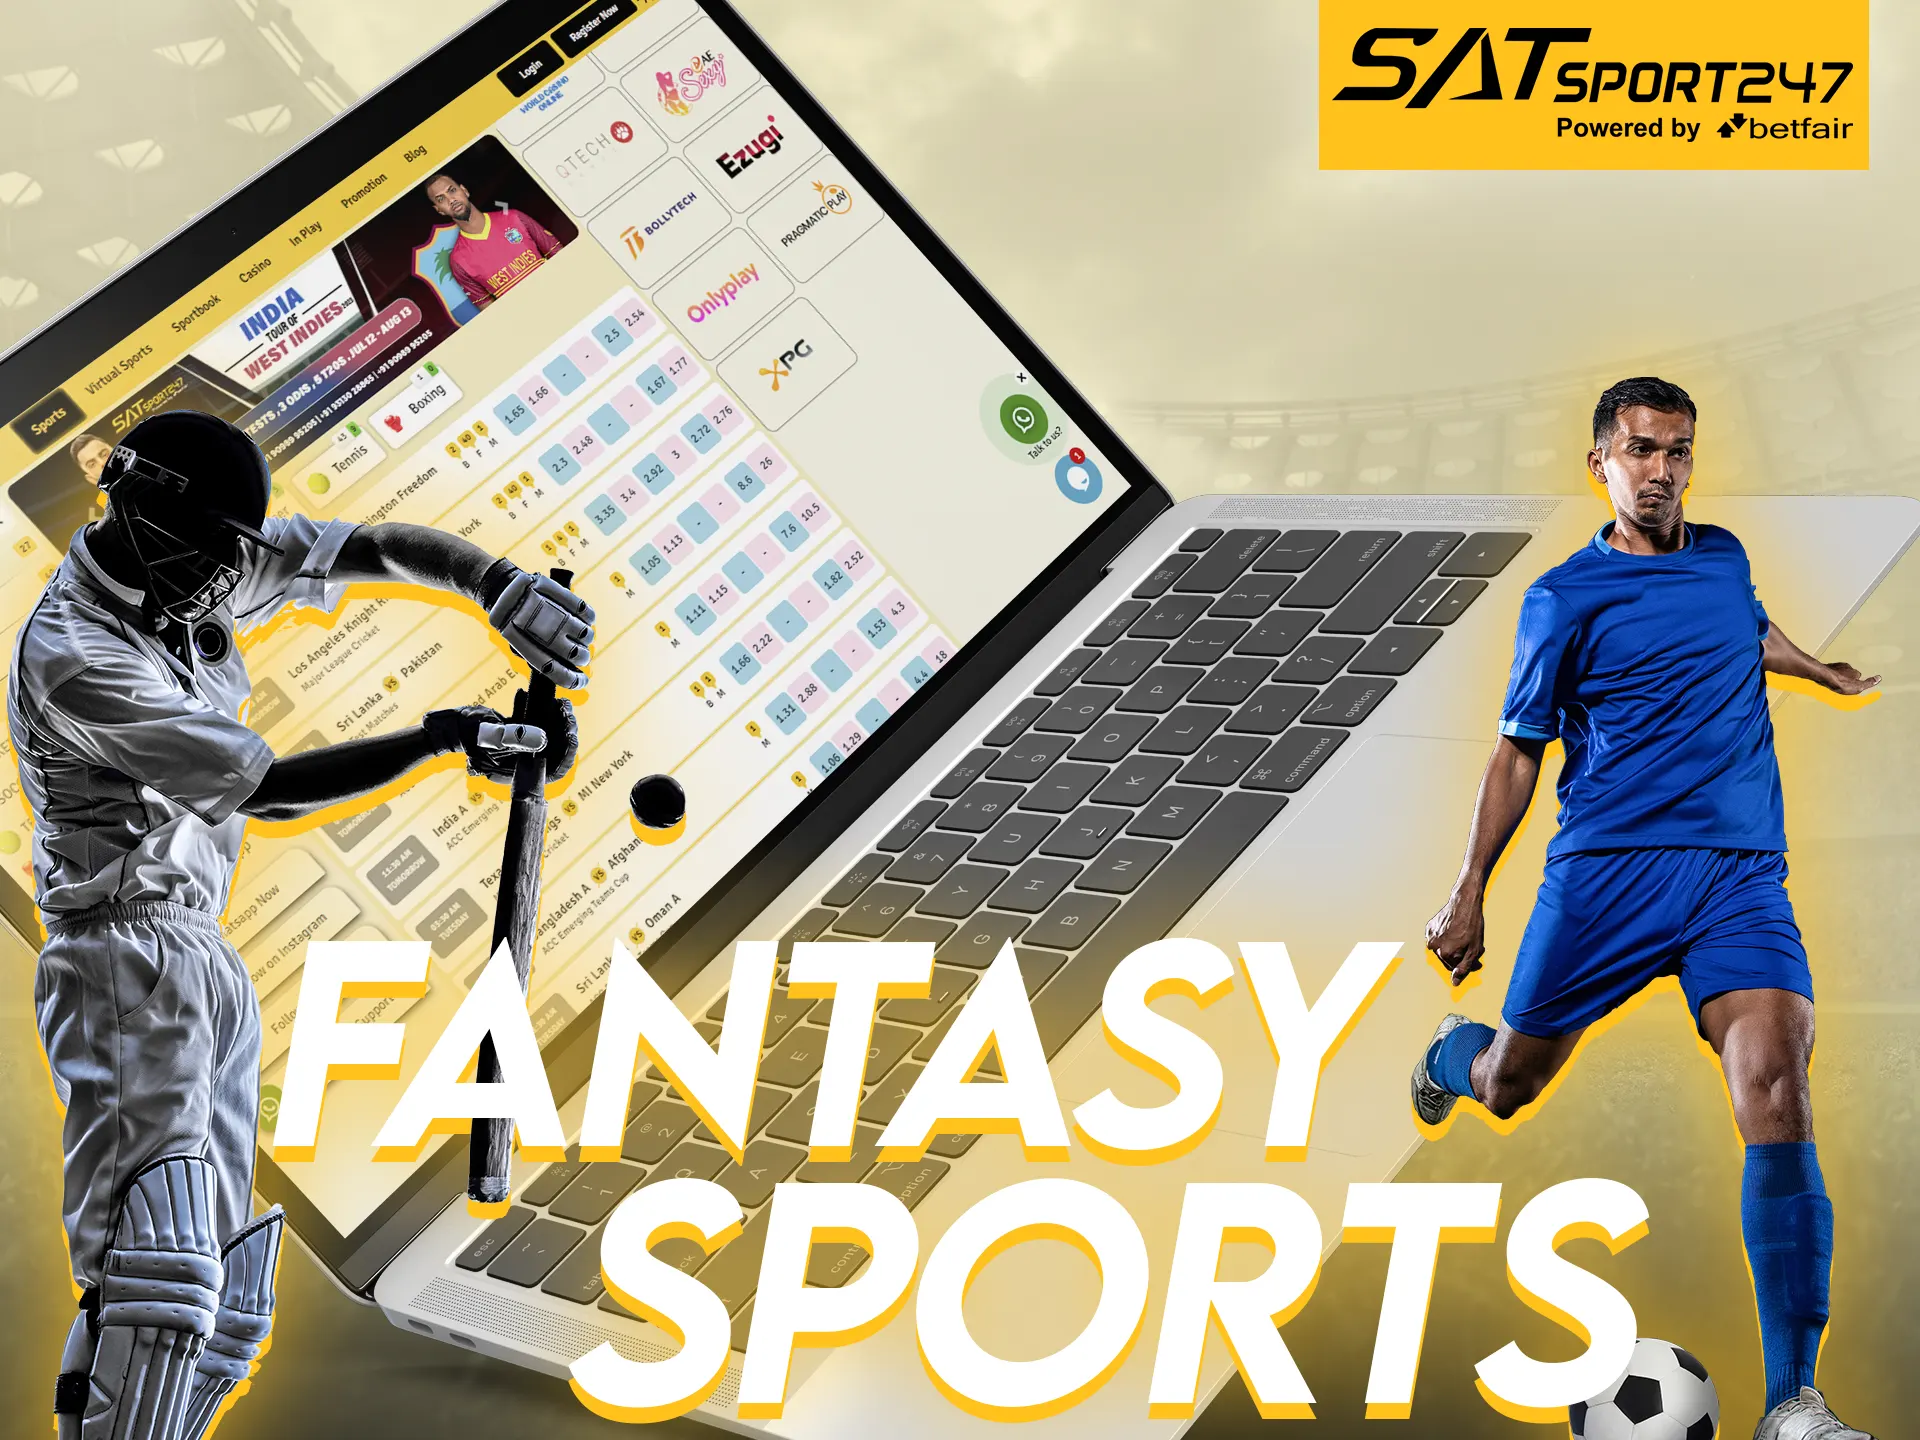 Place bets on fantasy sports with Satsport247 as well.